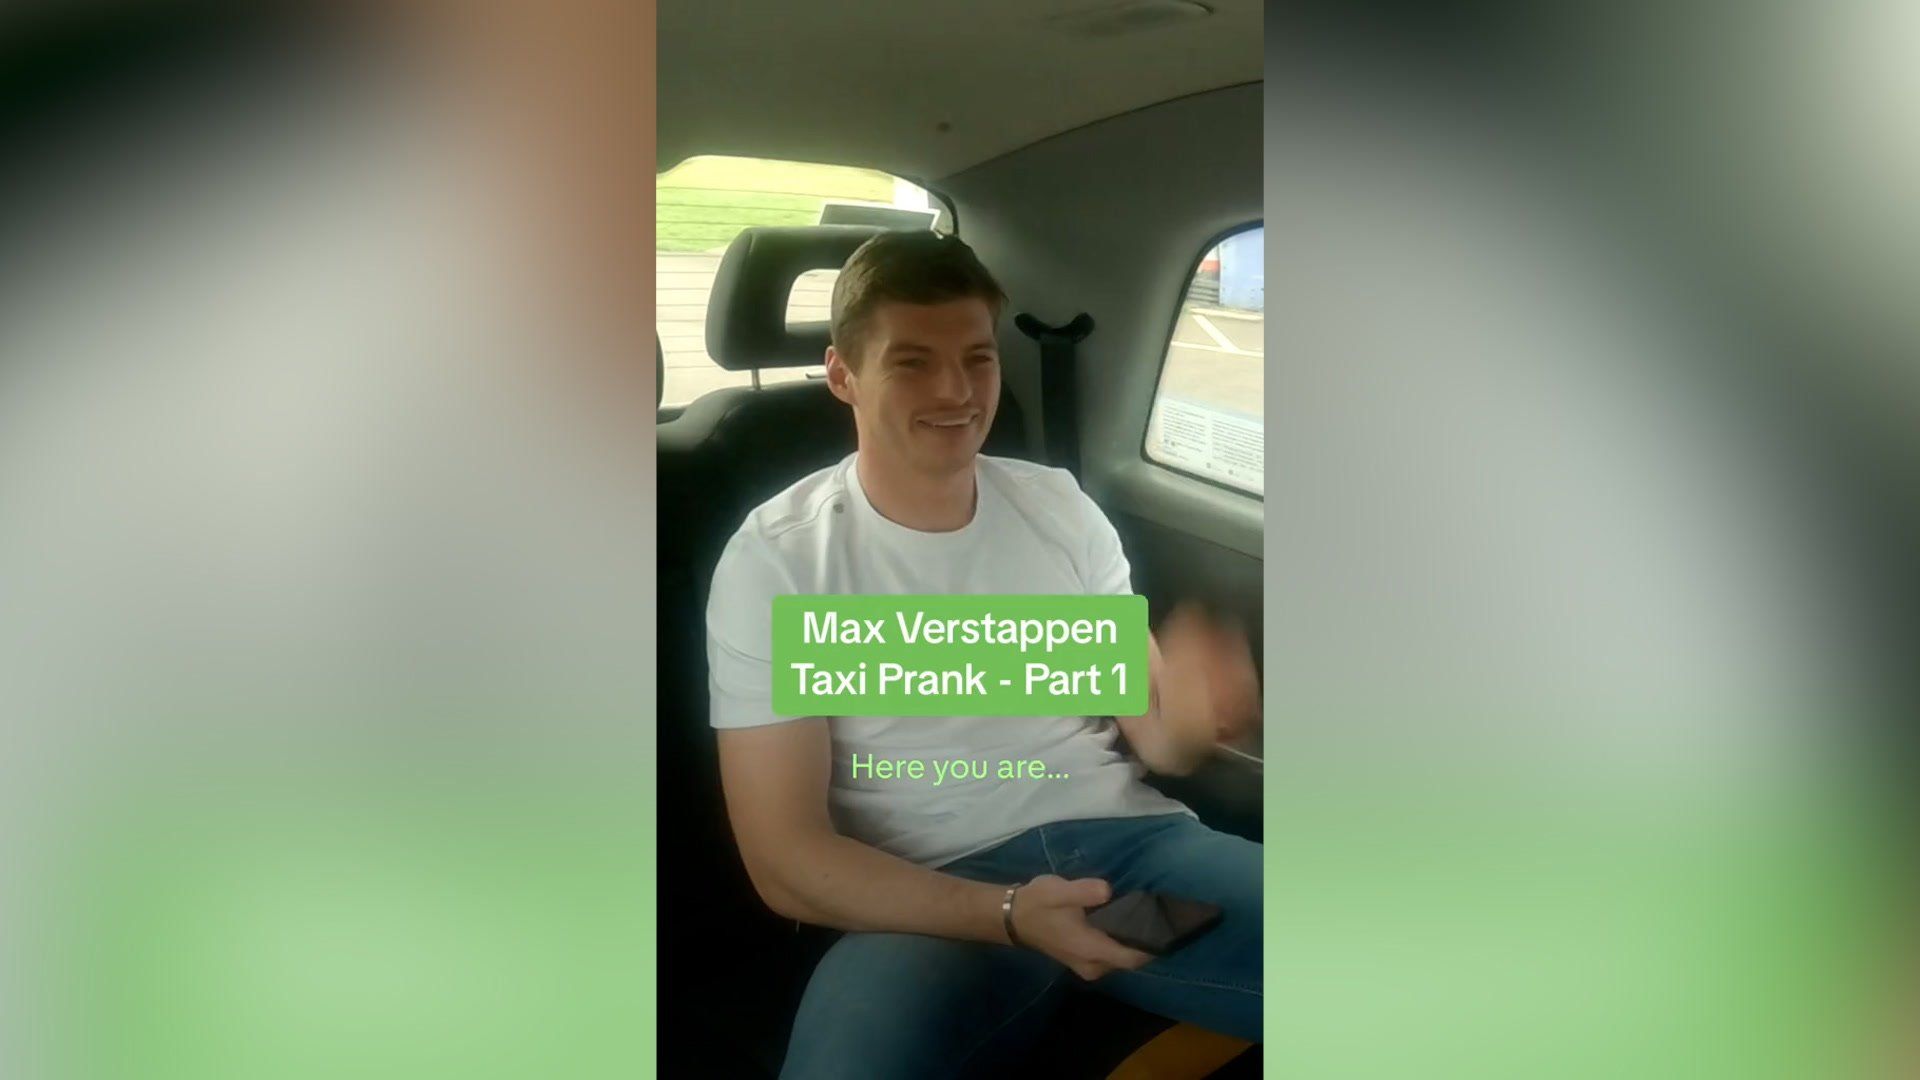 denny hines recommends New Fake Taxi